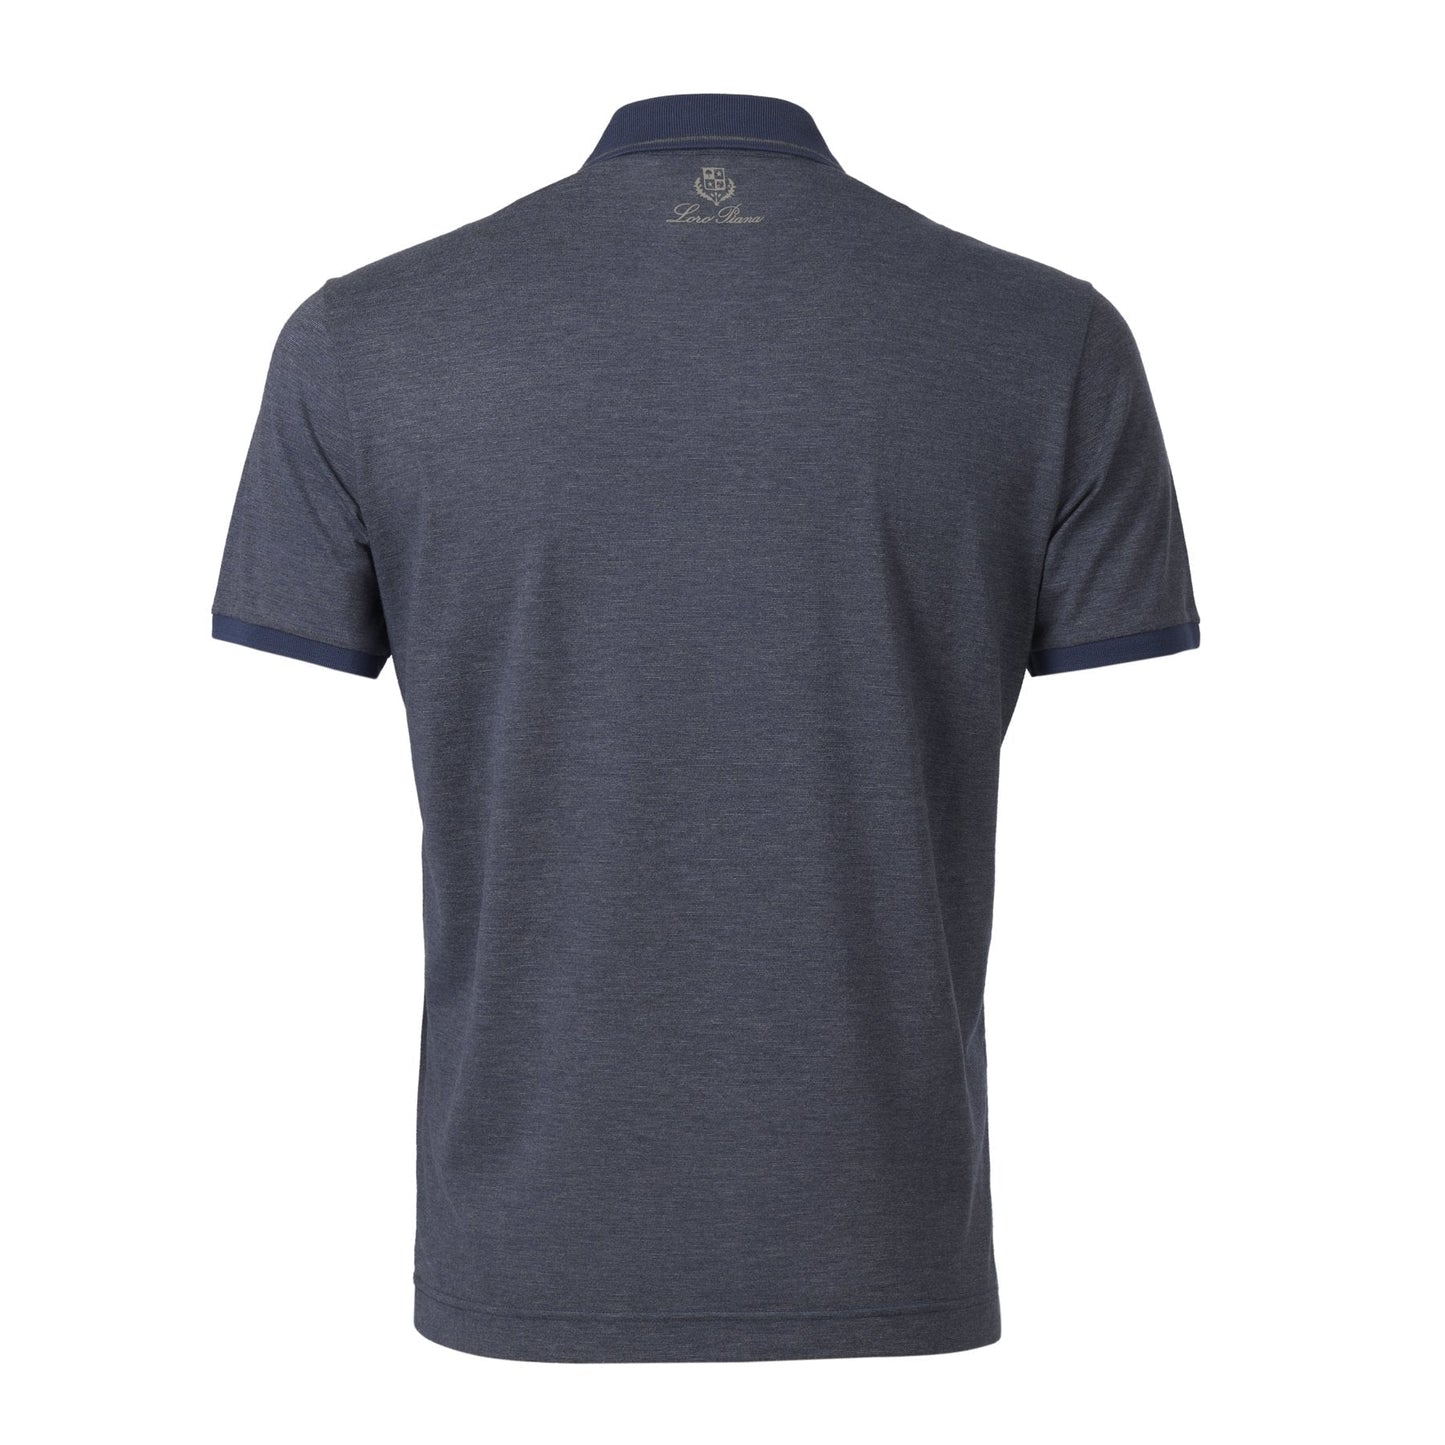 Slim-Fit Polo Shirt in Blue Grey Mottled